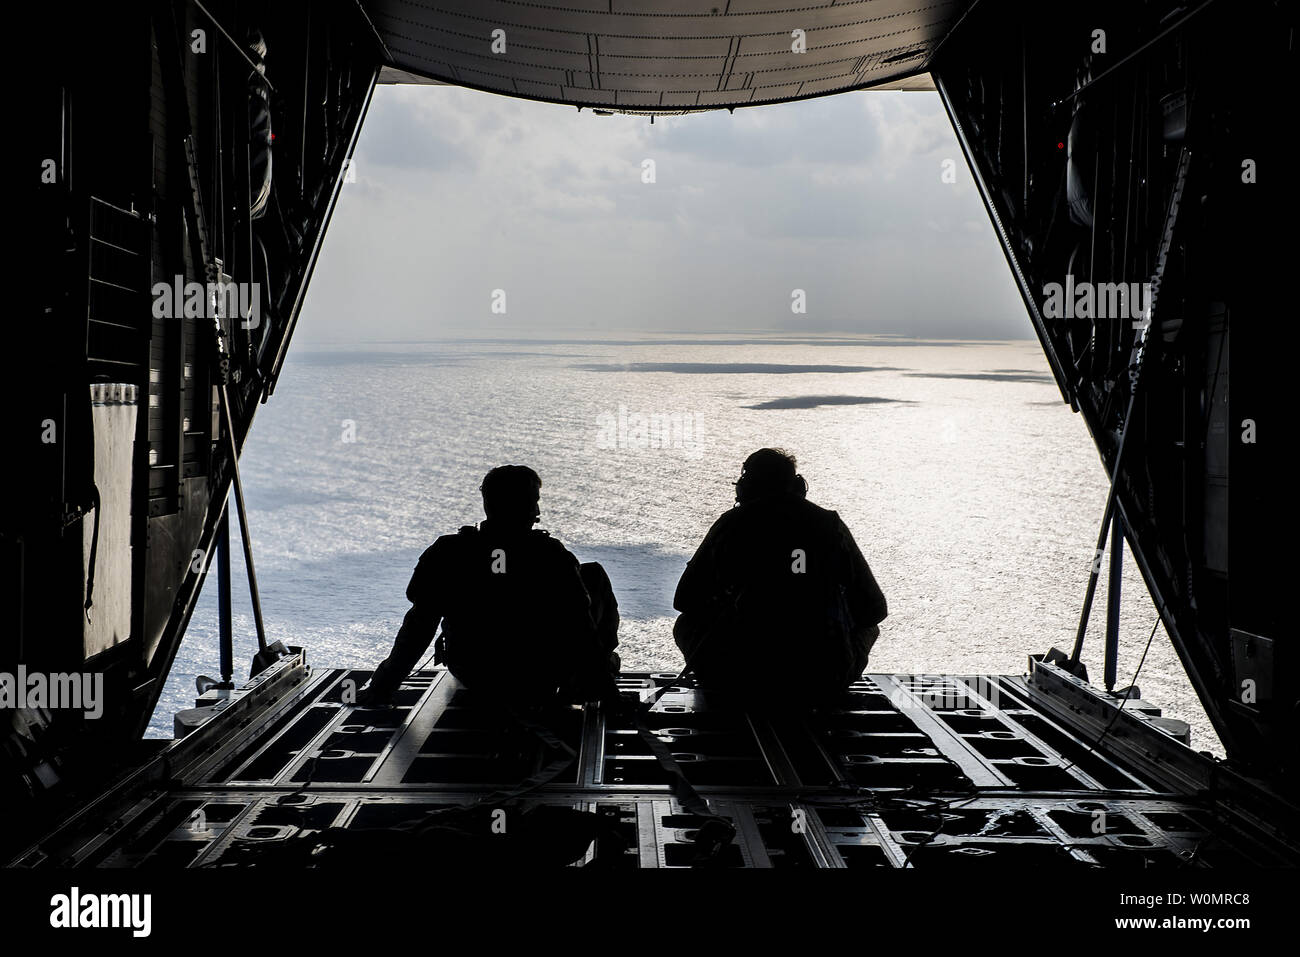 Senior Airman Timothy Manzer and Staff Sgt. Korey King, 17th Special Operations Squadron loadmasters, look out over the ocean after refueling HH-60 Pave Hawks from 33rd Rescue Squadron and Japan Air Self-Defense Force during exercise Keen Sword 17, November 7, 2016, near Okinawa, Japan. Photo by Senior Airman Stephen G. Eigel/U.S. Air Force/UPI Stock Photo